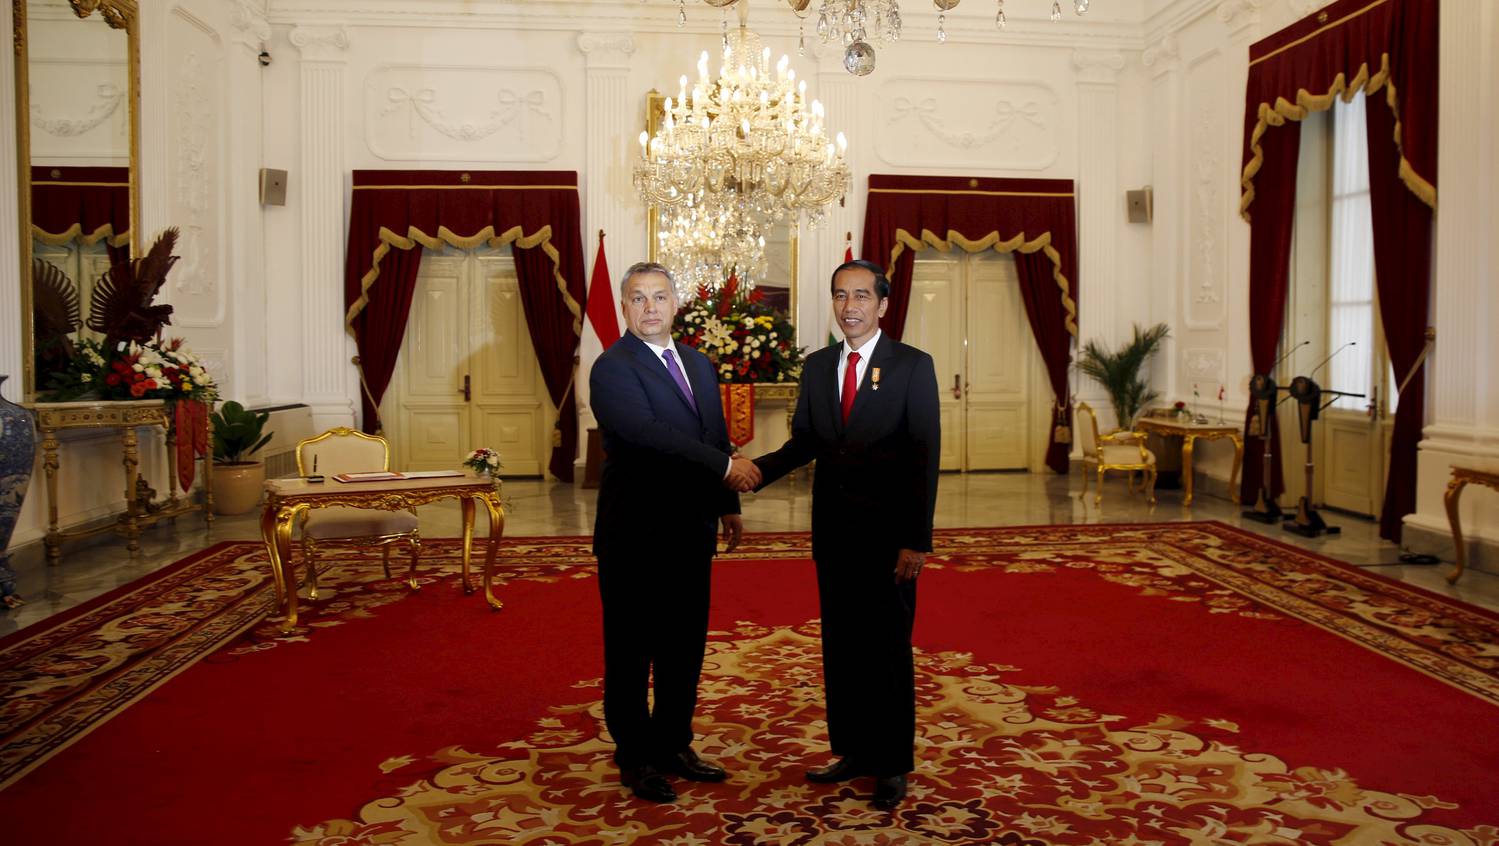 PRIME MINISTER VIKTOR ORBÁN PAYED OFFICIAL VISIT TO INDONESIA